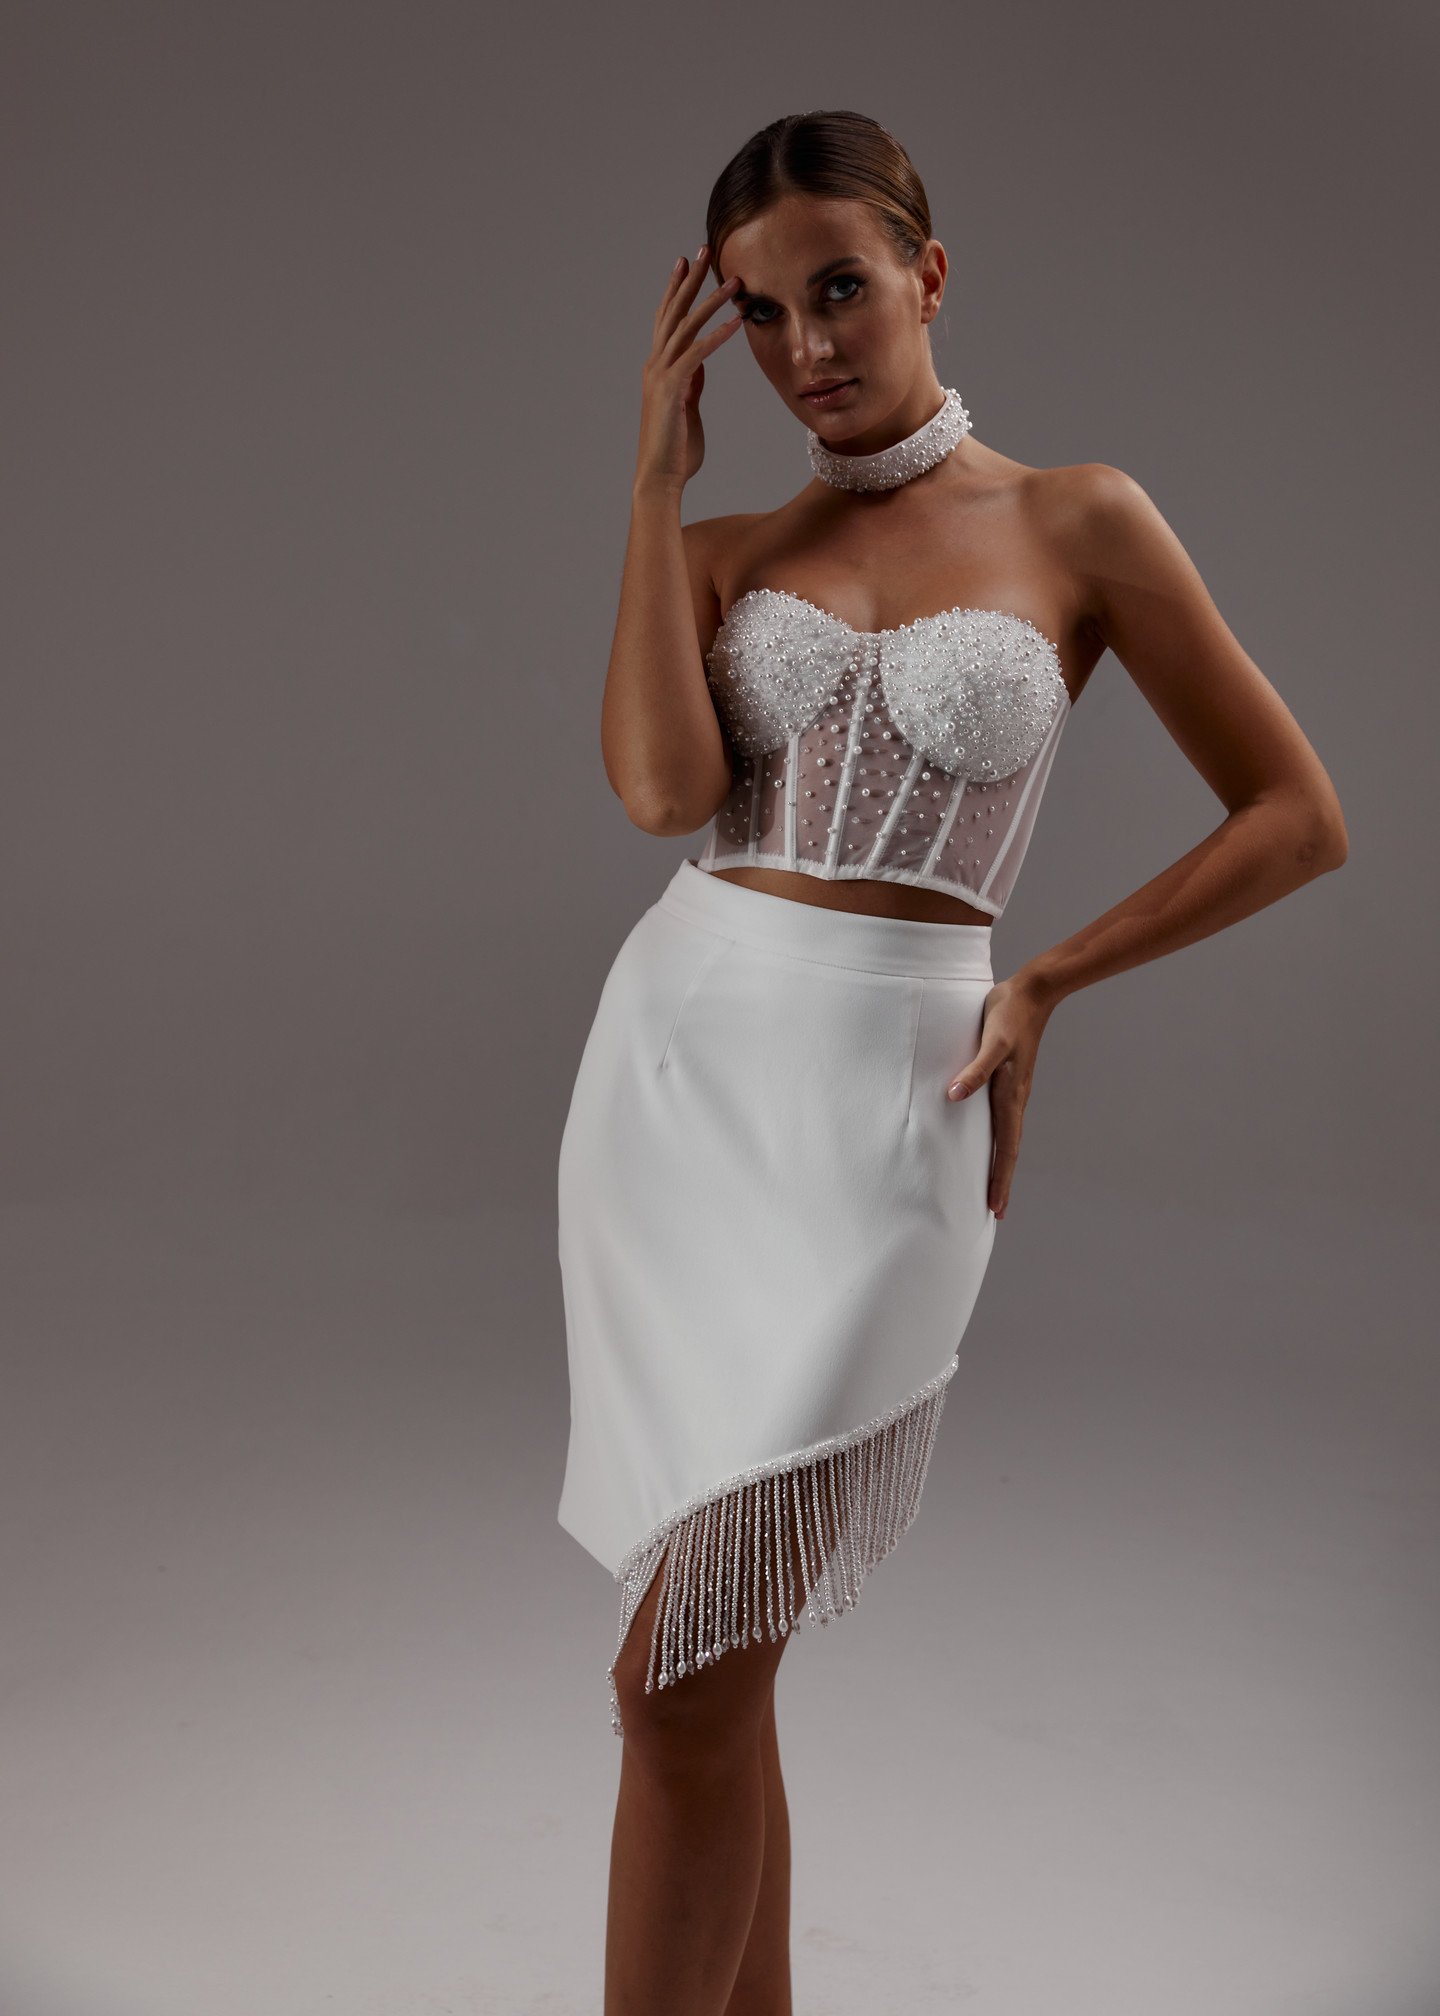 Fringed skirt, 2023, couture, skirt, bridal, off-white, offwhite kit with pearls and crystals, embroidery